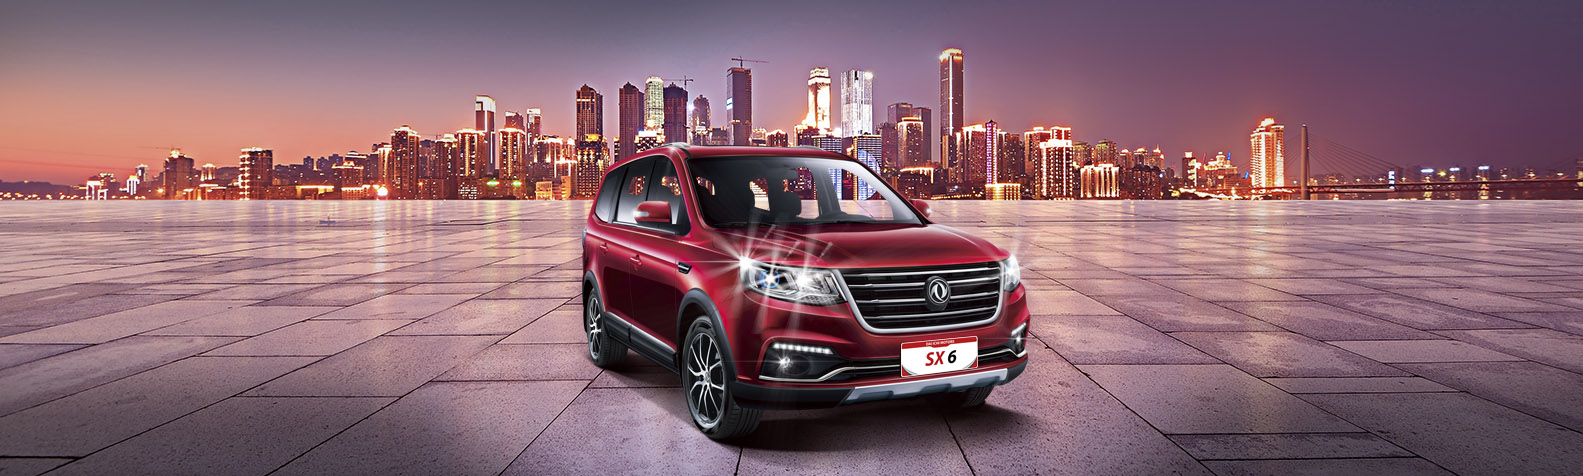 DONGFENG_SX6_